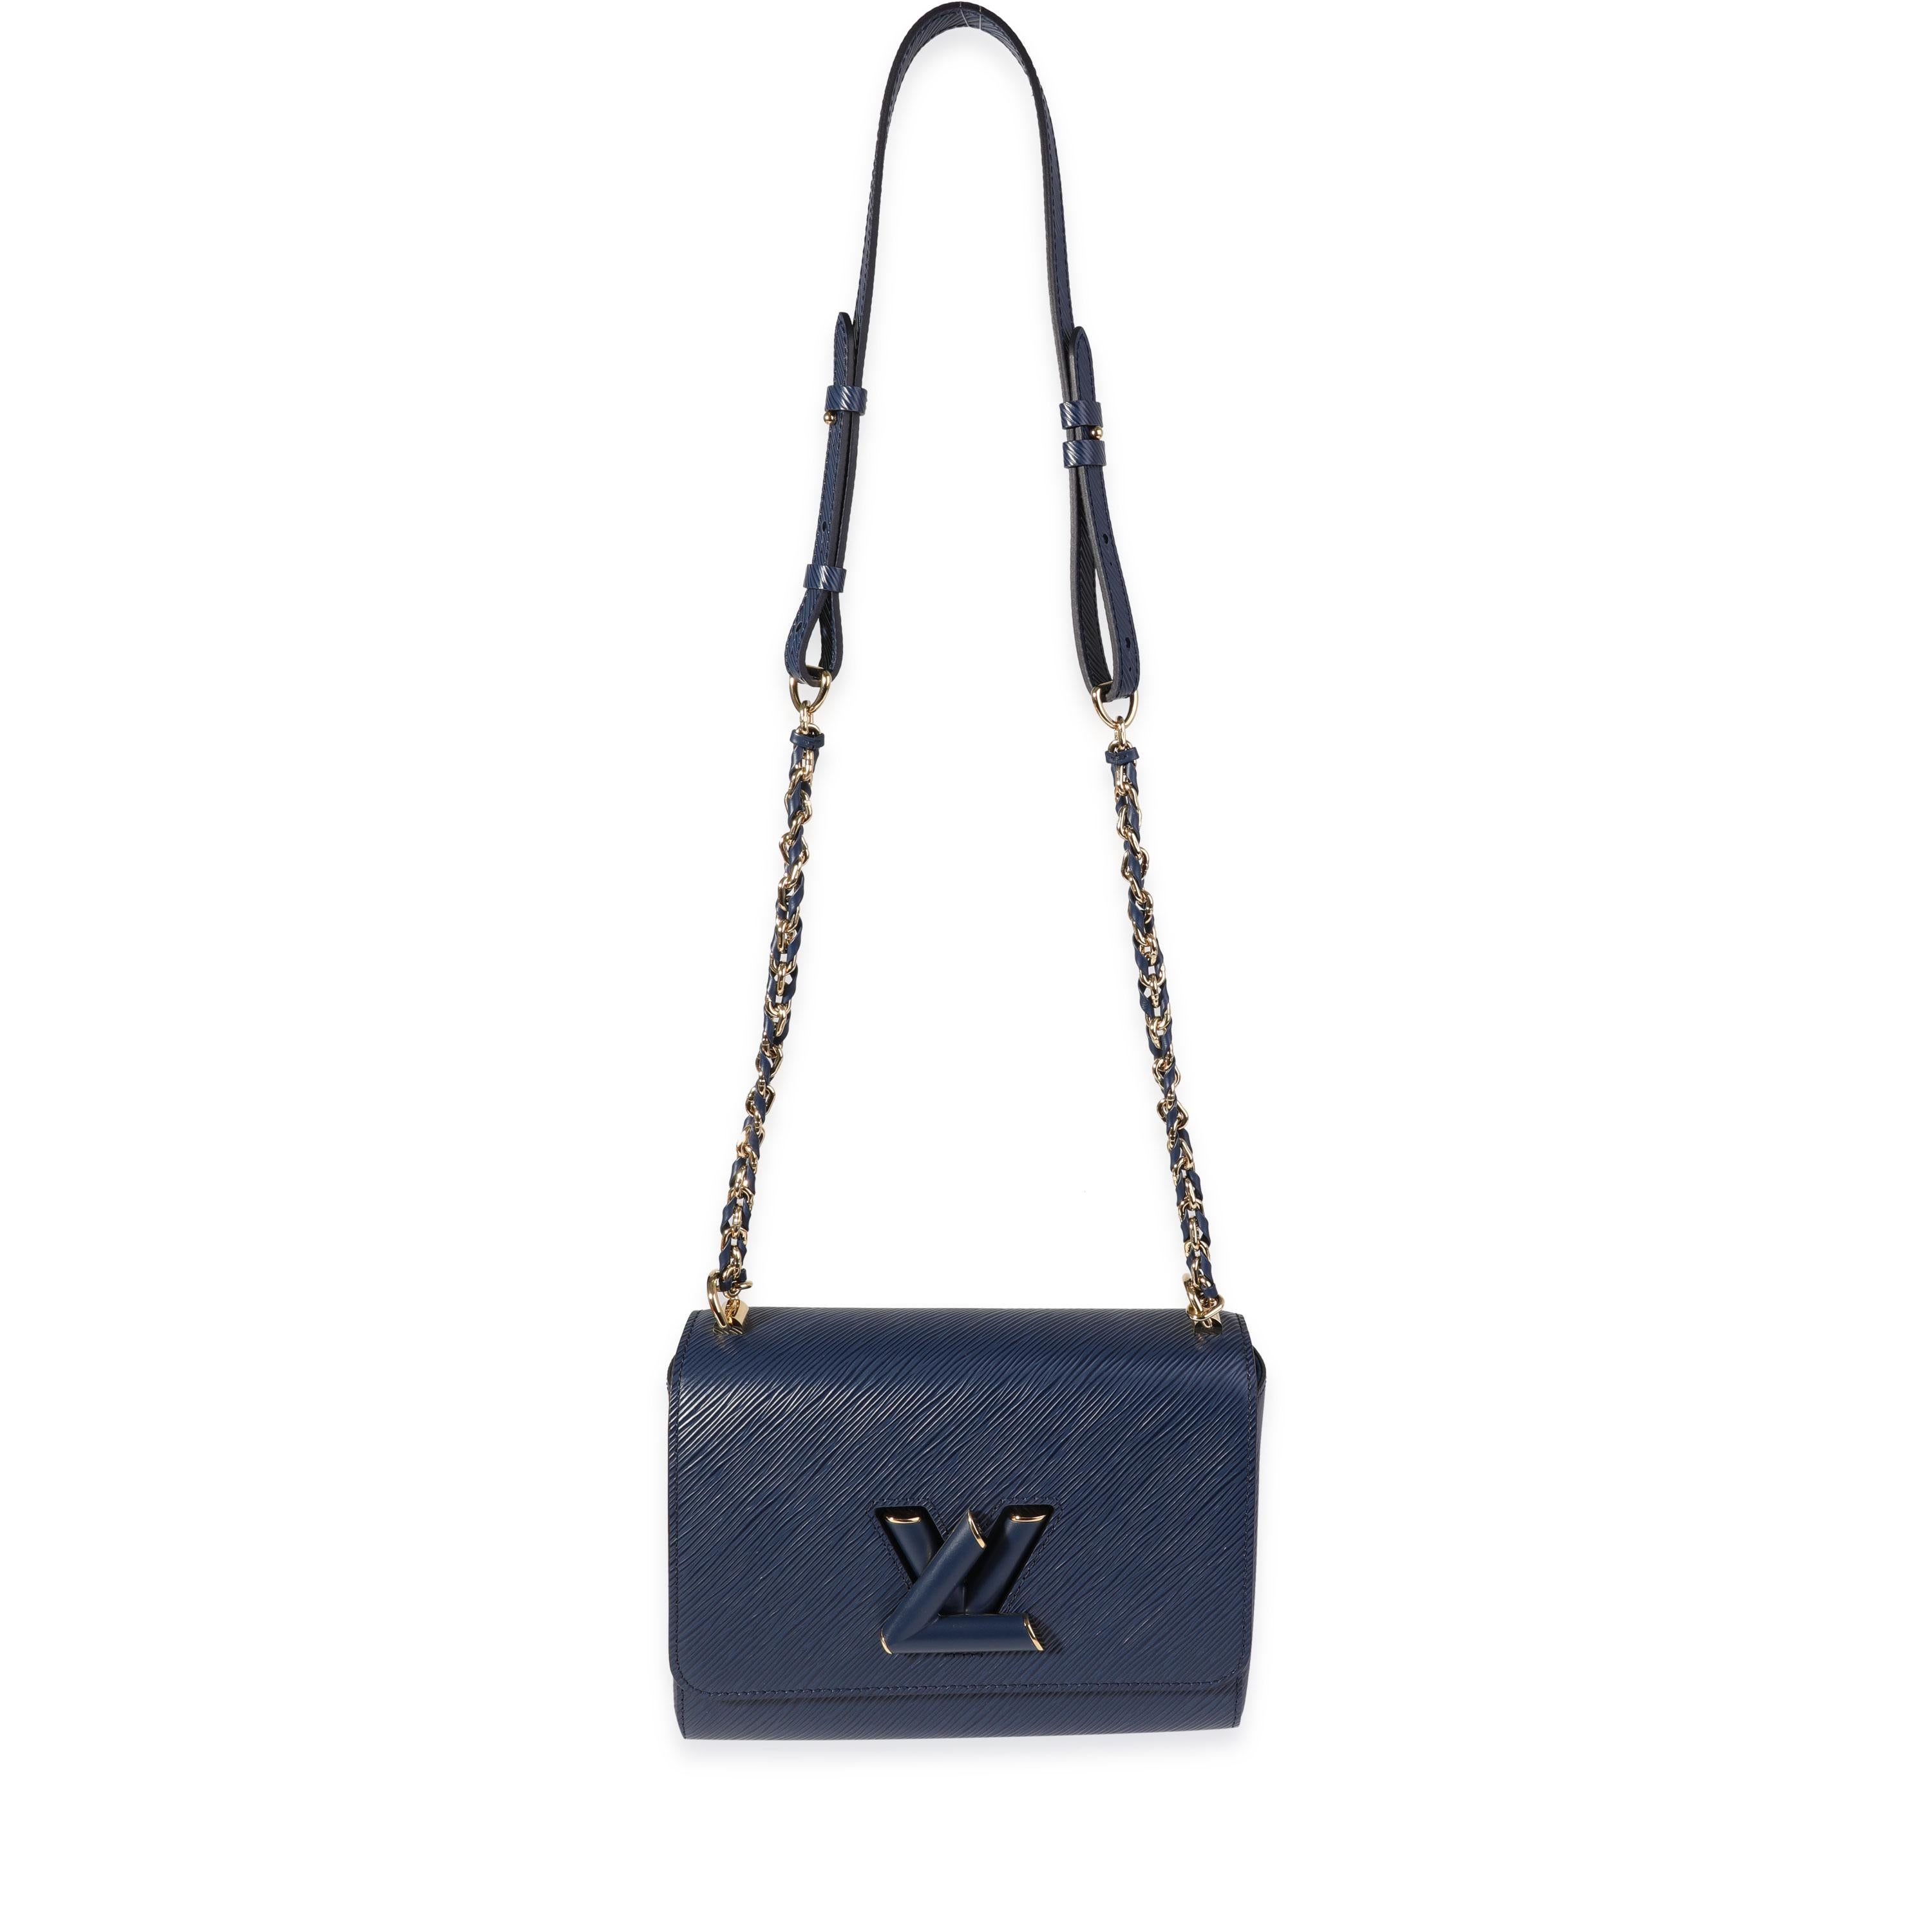 Listing Title: Louis Vuitton Blue Epi Twist MM Crossbody
SKU: 121130
MSRP: 4700.00
Condition: Pre-owned 
Handbag Condition: Excellent
Condition Comments: Excellent Condition. Light Scratching to hardware. Minor scuffing to suede. No other visible